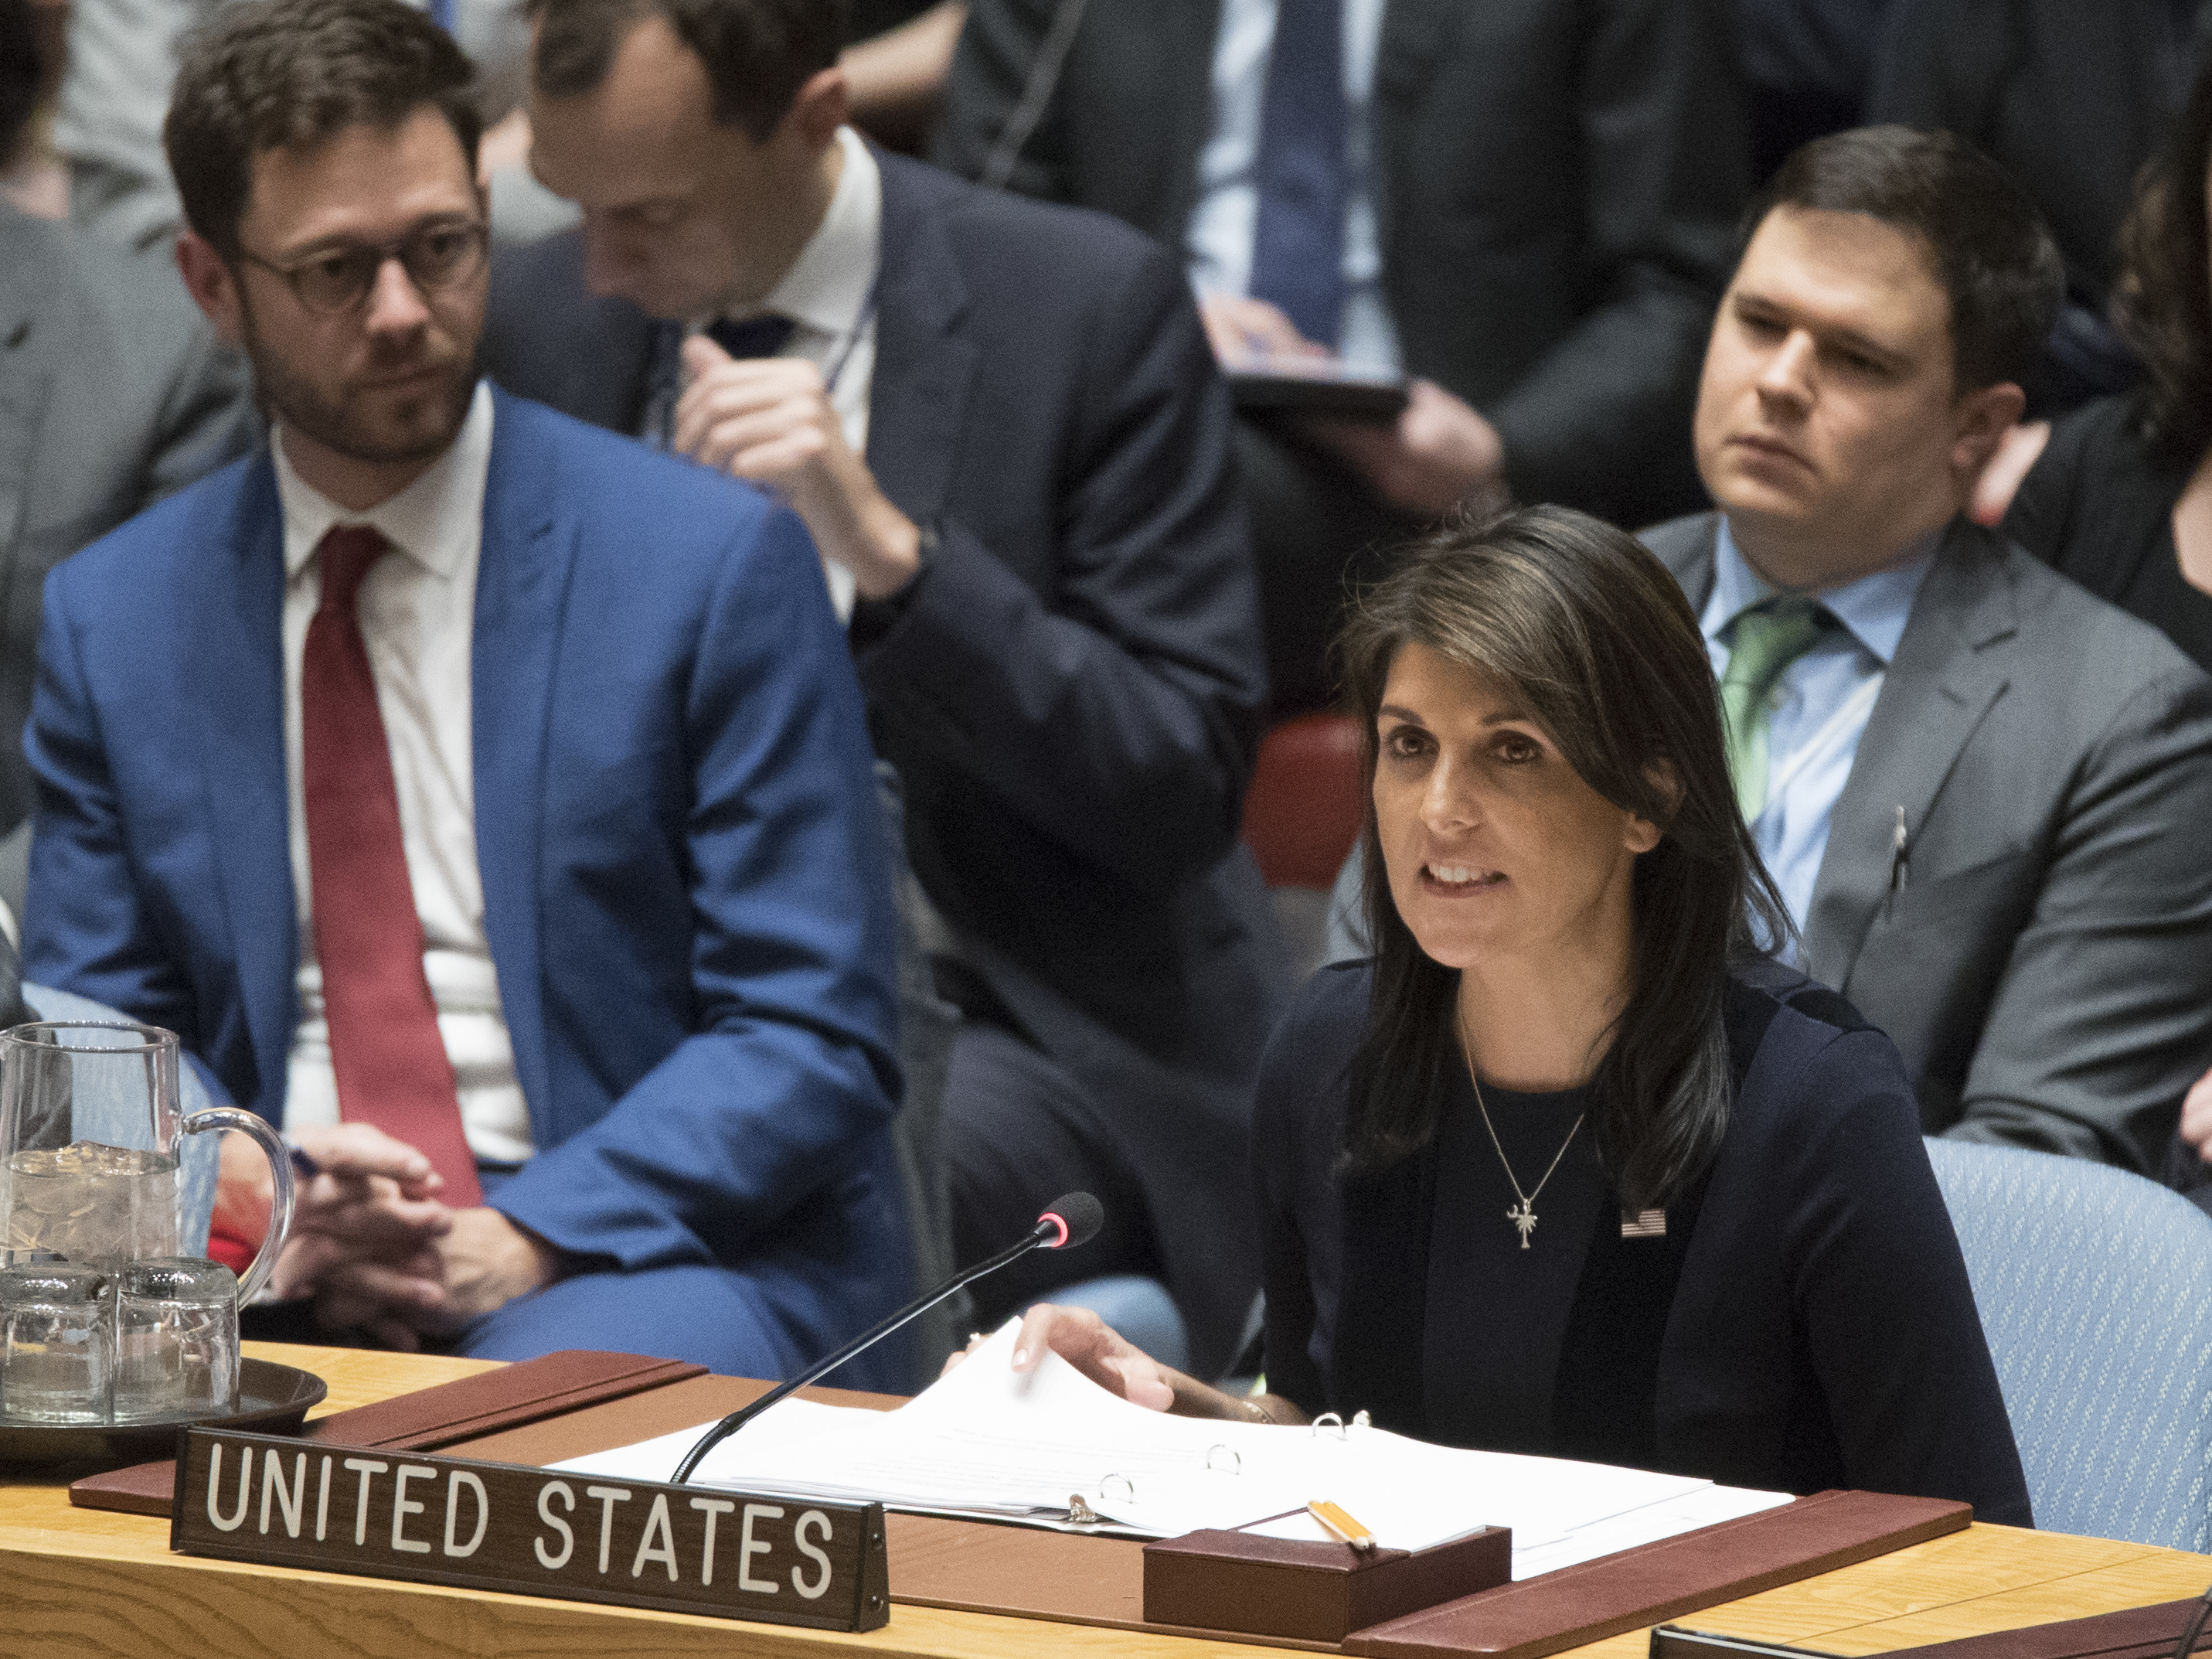 U.S. Ambassador to the United Nations Nikki Haley speaks during a Security Council meeting on the situation between Britain and Russia, on Wednesday. (Photo by Mary Altaffer/AP)